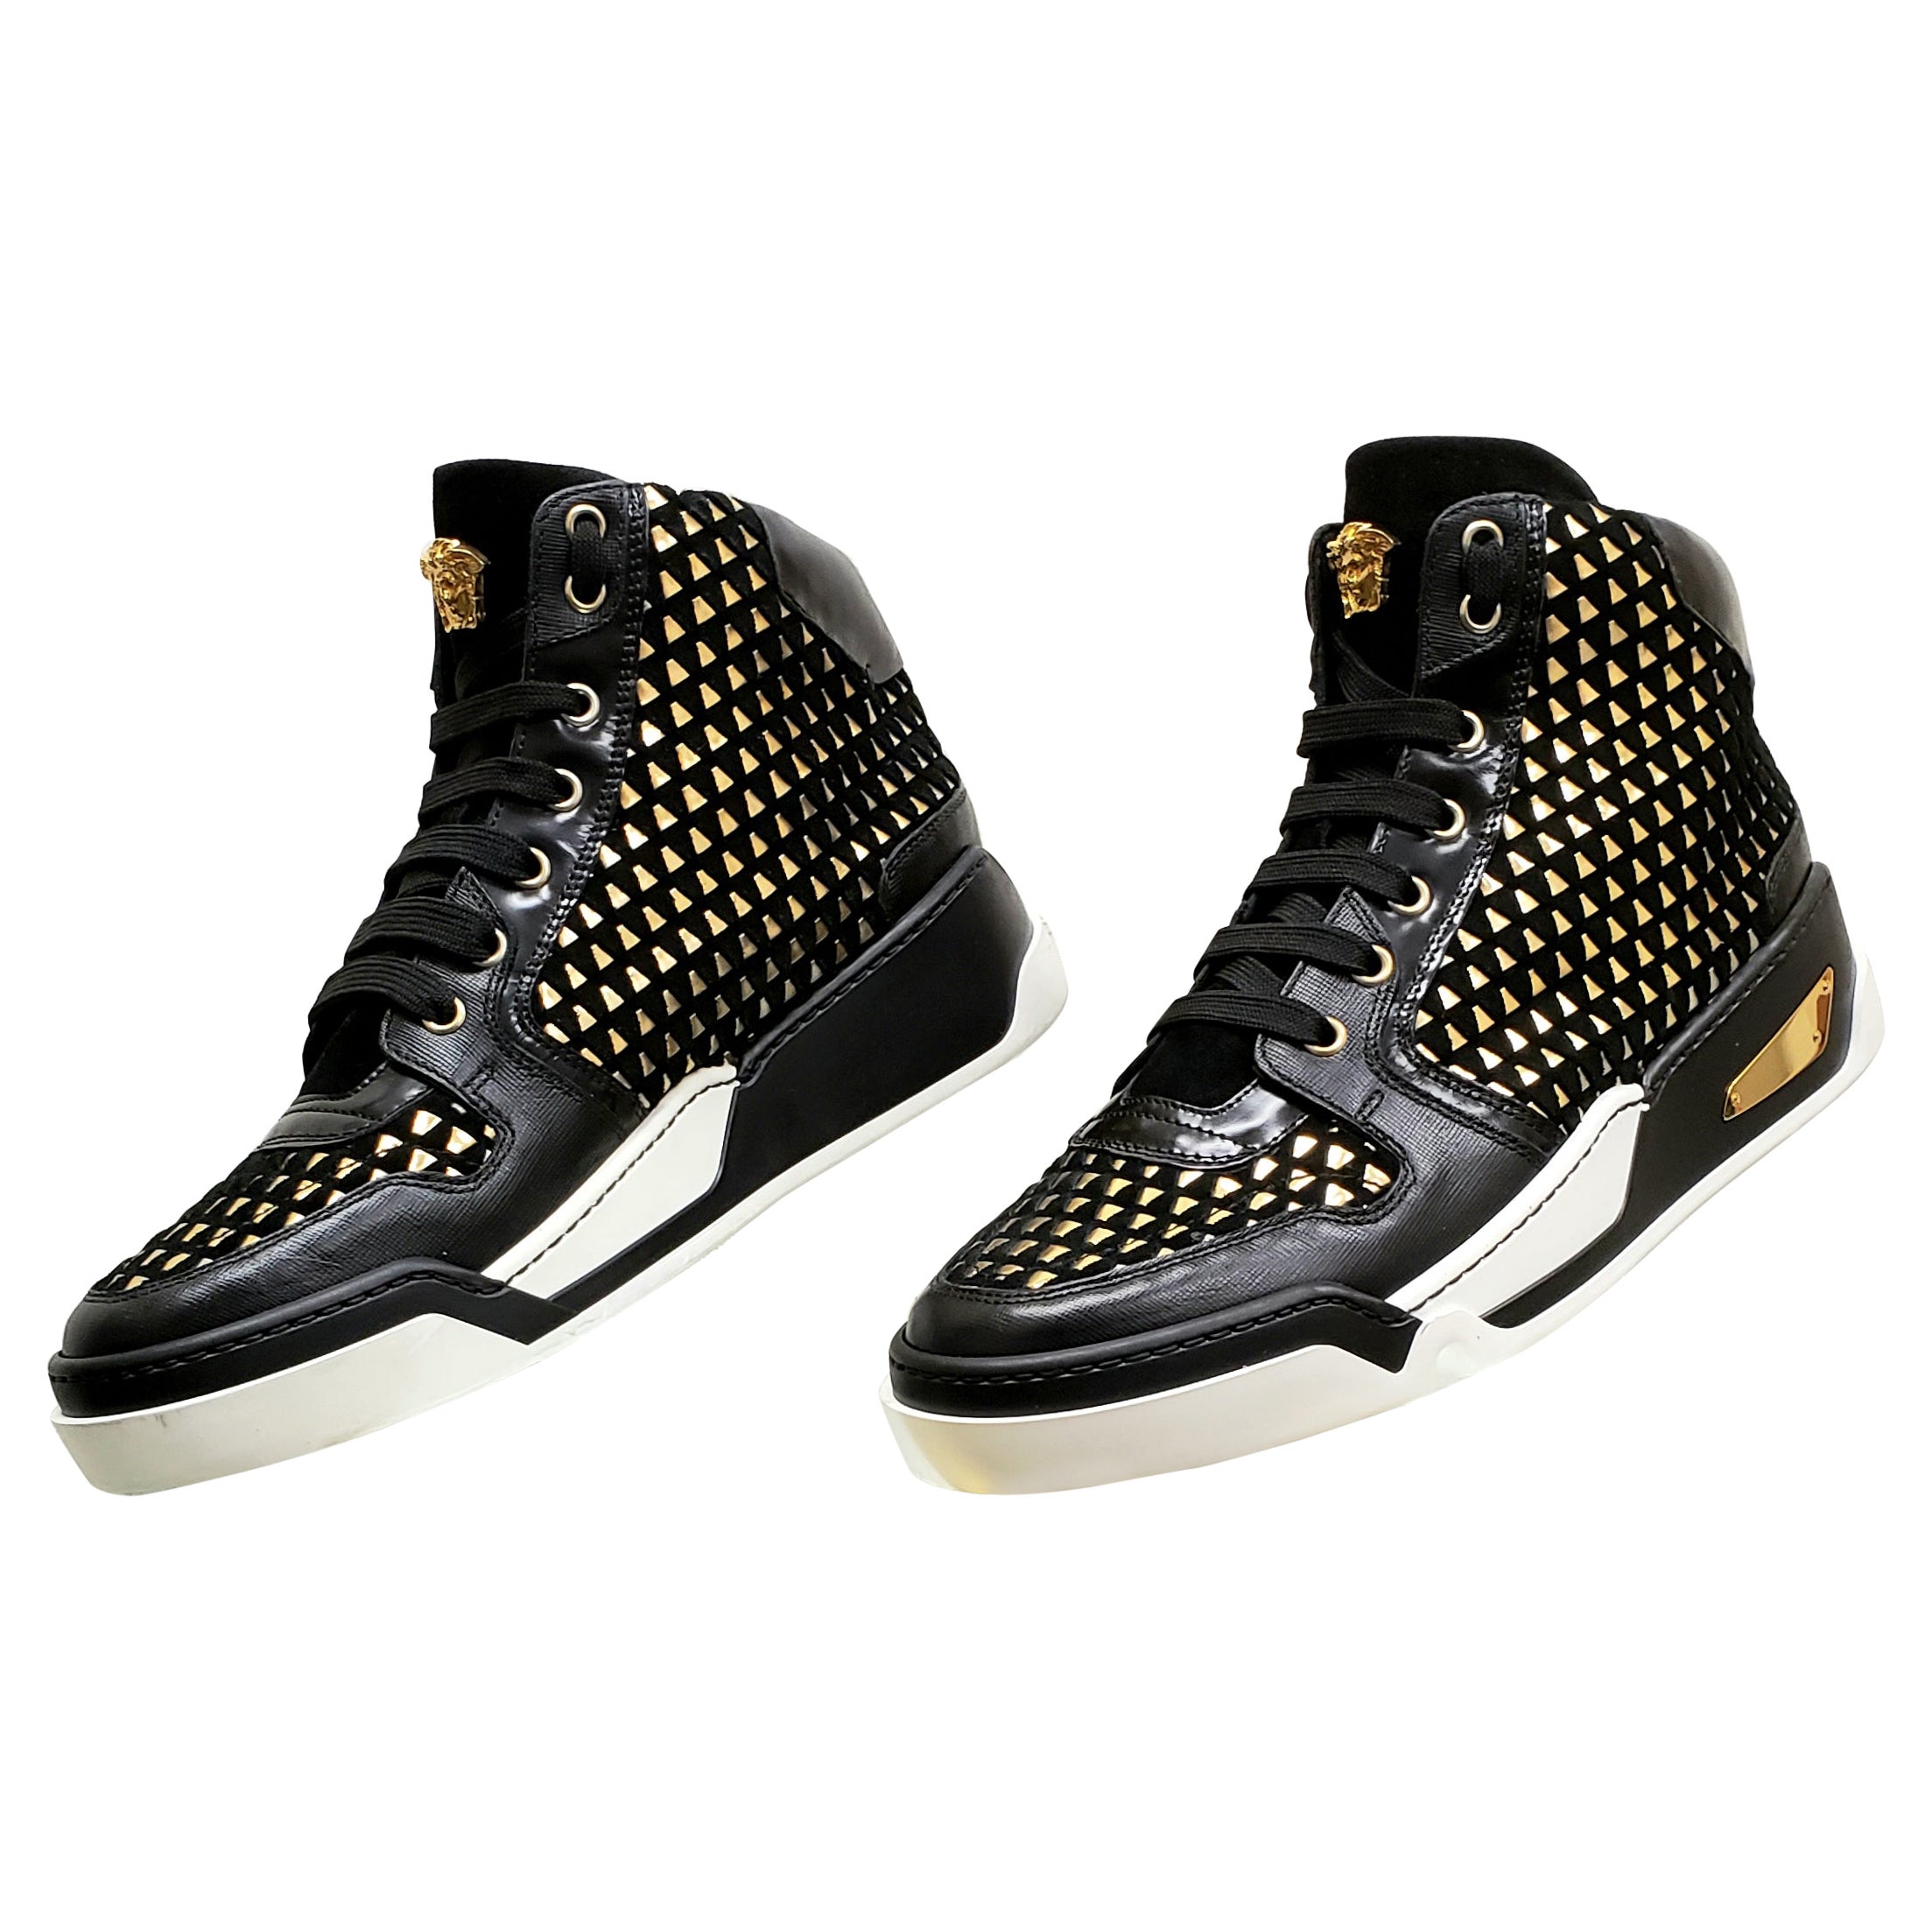 NEW VERSACE BLACK SUEDE GOLD WEAVE HIGH-TOP SNEAKERS W/Gold MEDUSA 42 - 9